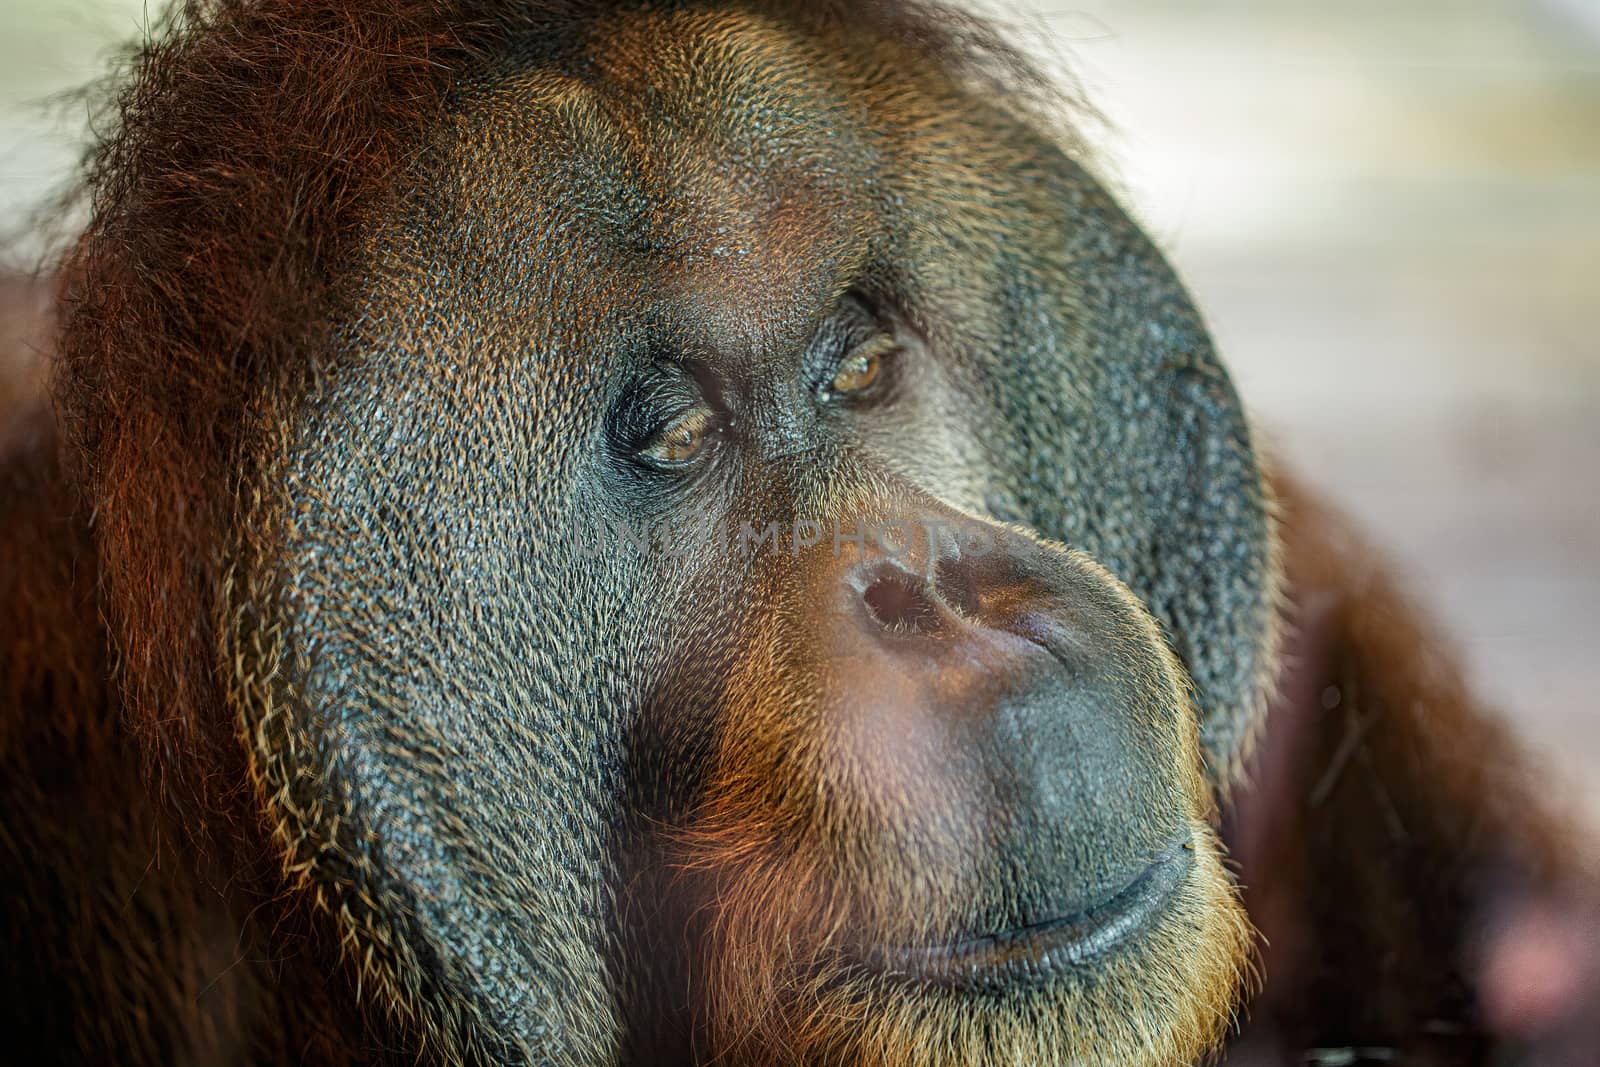 Bornean orangutan (Pongo pygmaeus) is a species of orangutan native to the island of Borneo. Is a critically endangered species, with deforestation, palm oil plantations, and hunting by dugulan